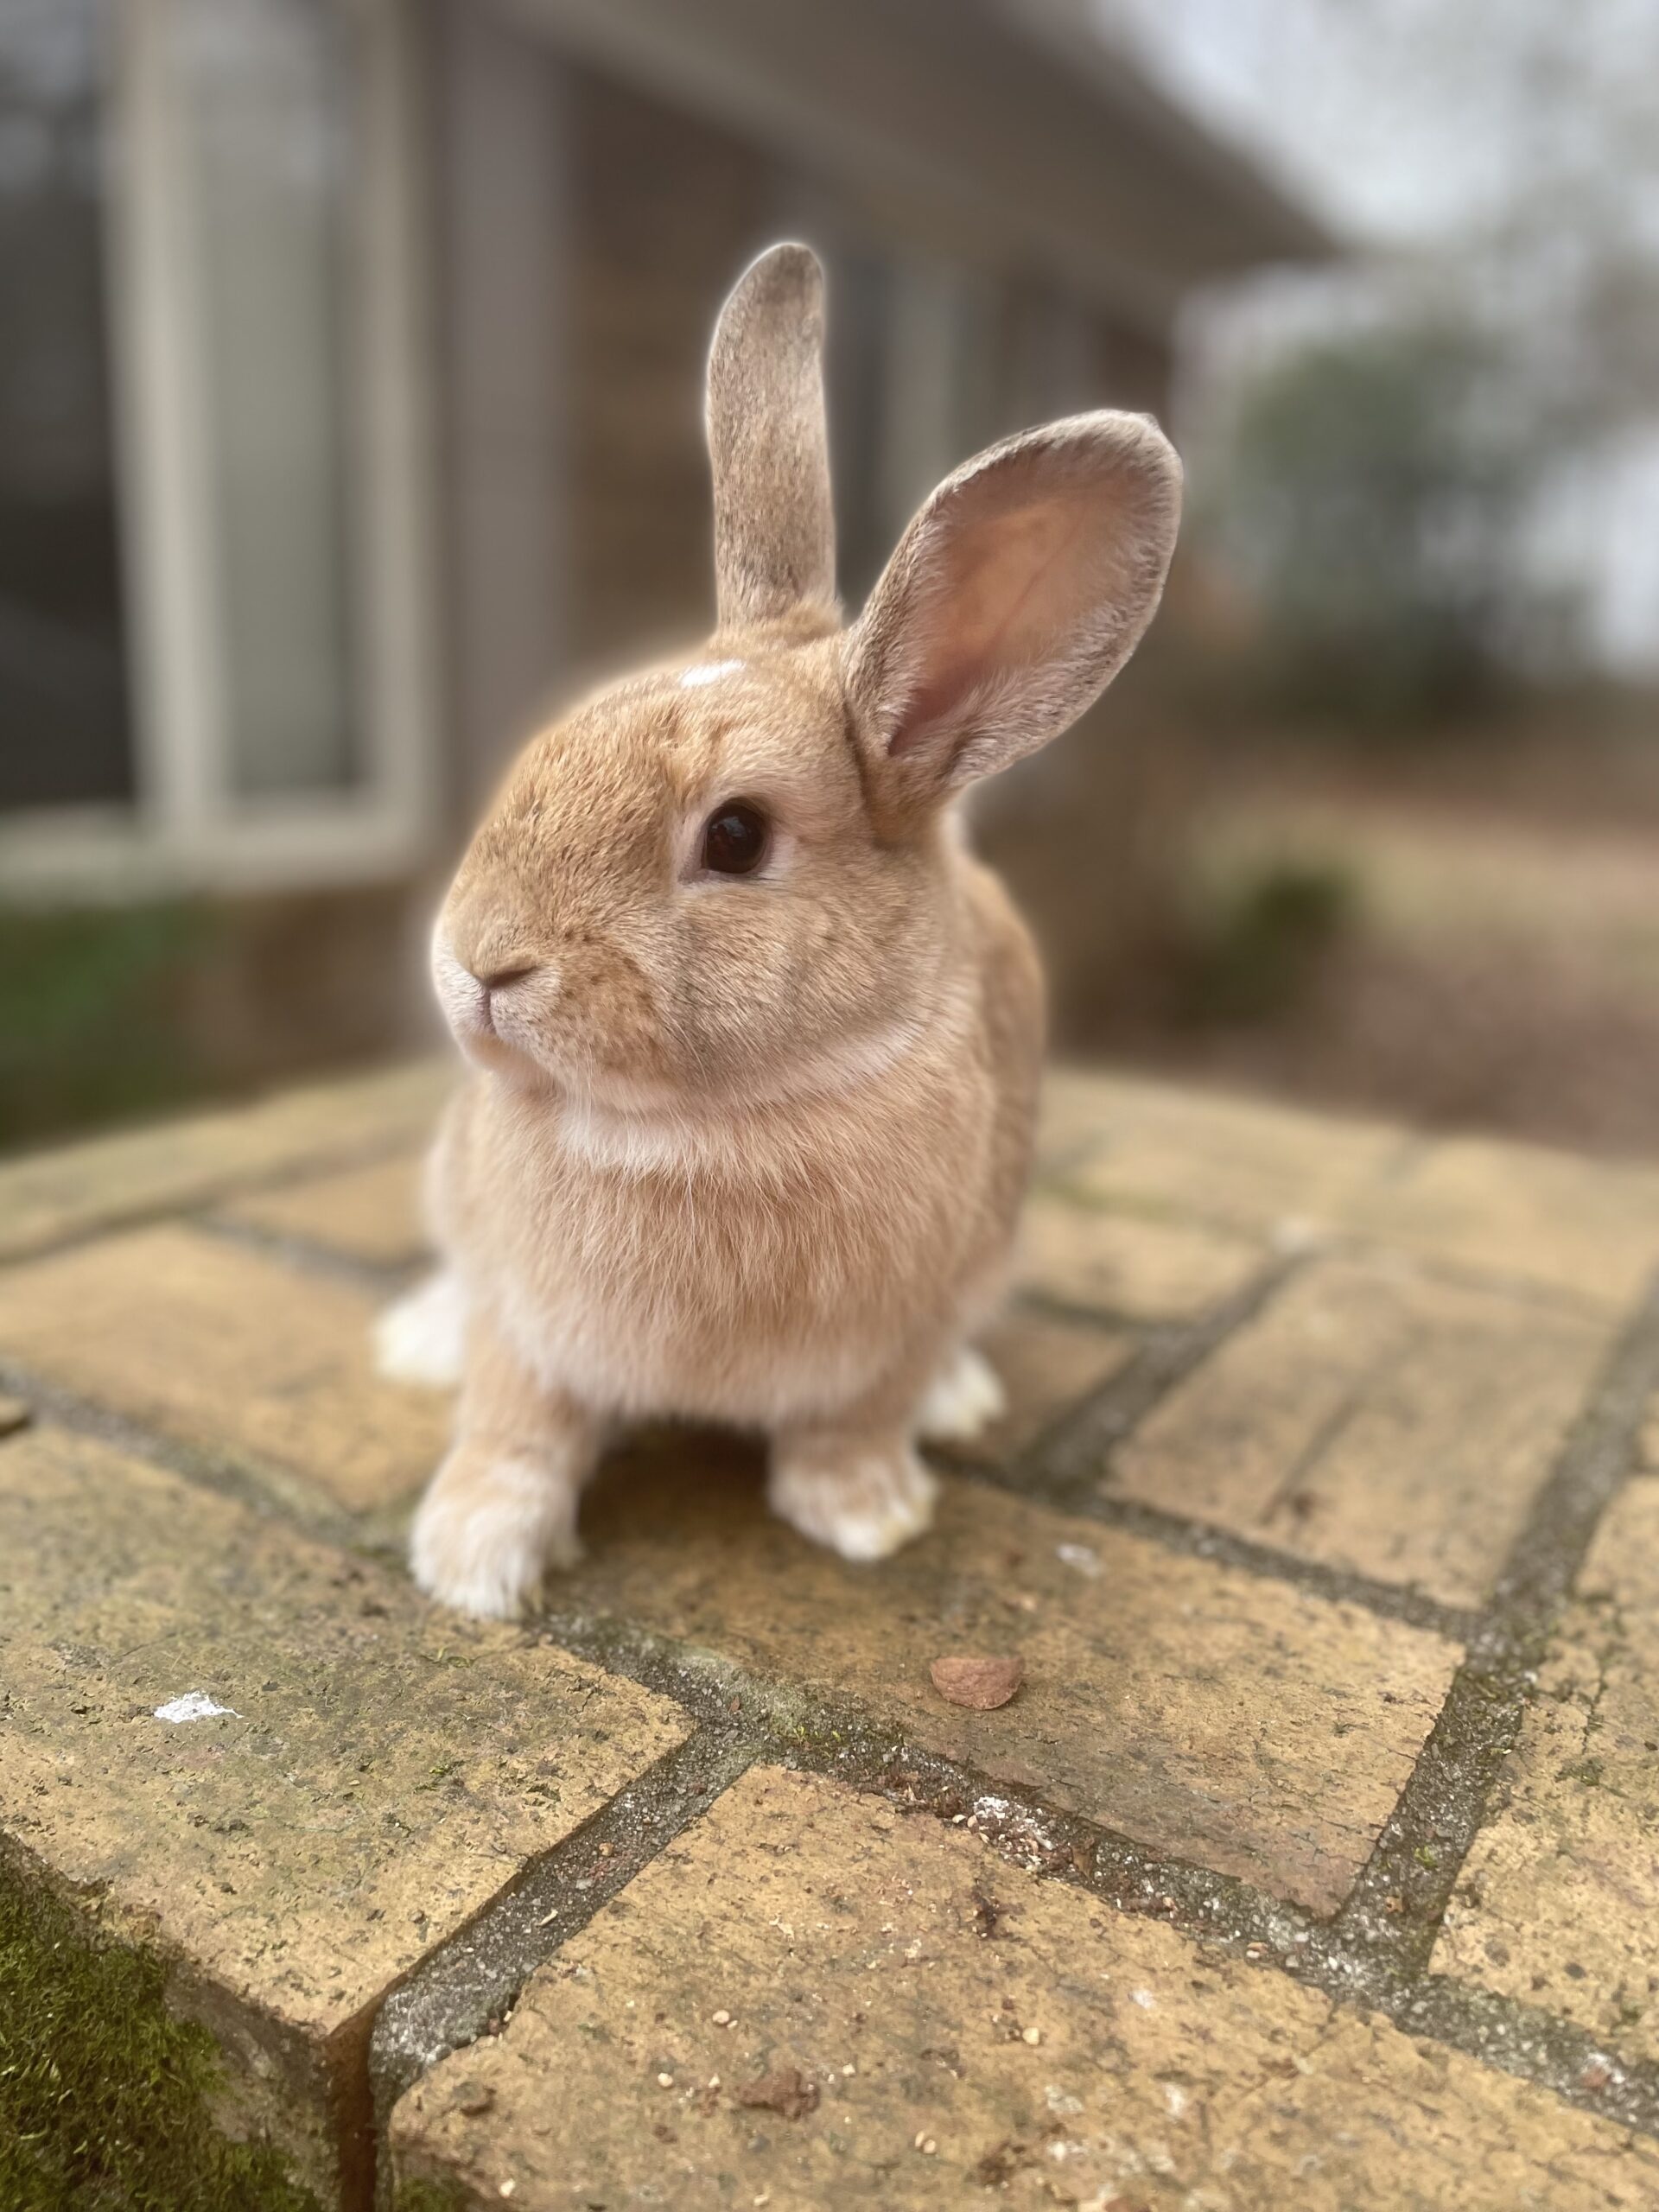 Breeding Aged Purebred Bunnies For Sale Mini Rex And Lionhead Rabbits For Sale